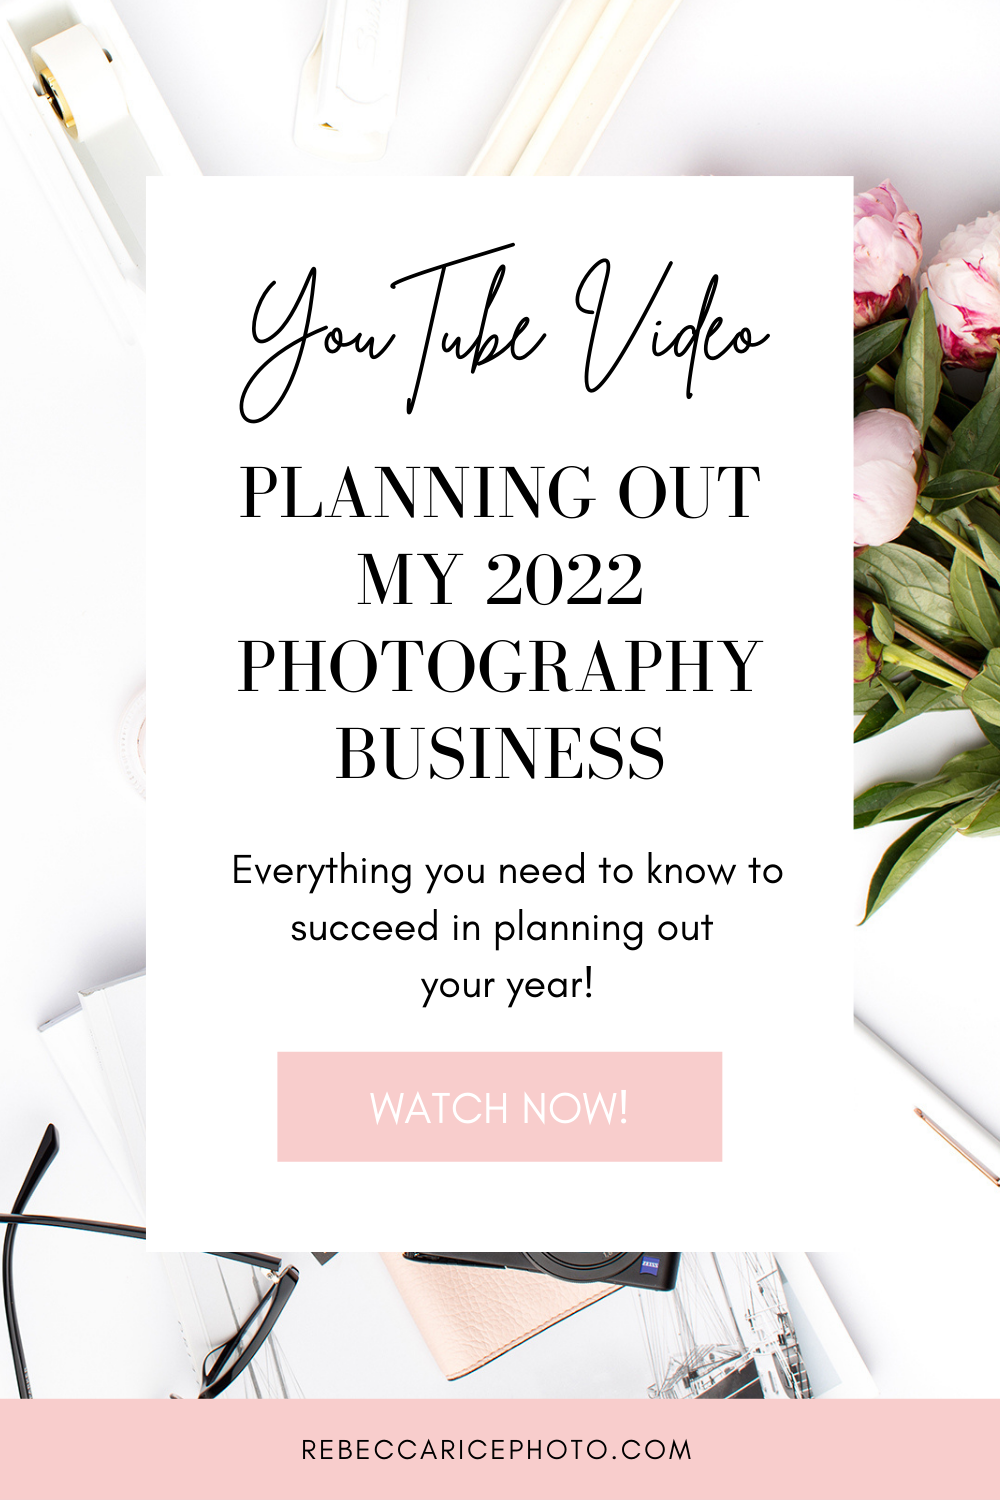 Planning out my 2022 Photography Business | Business Planning Tips